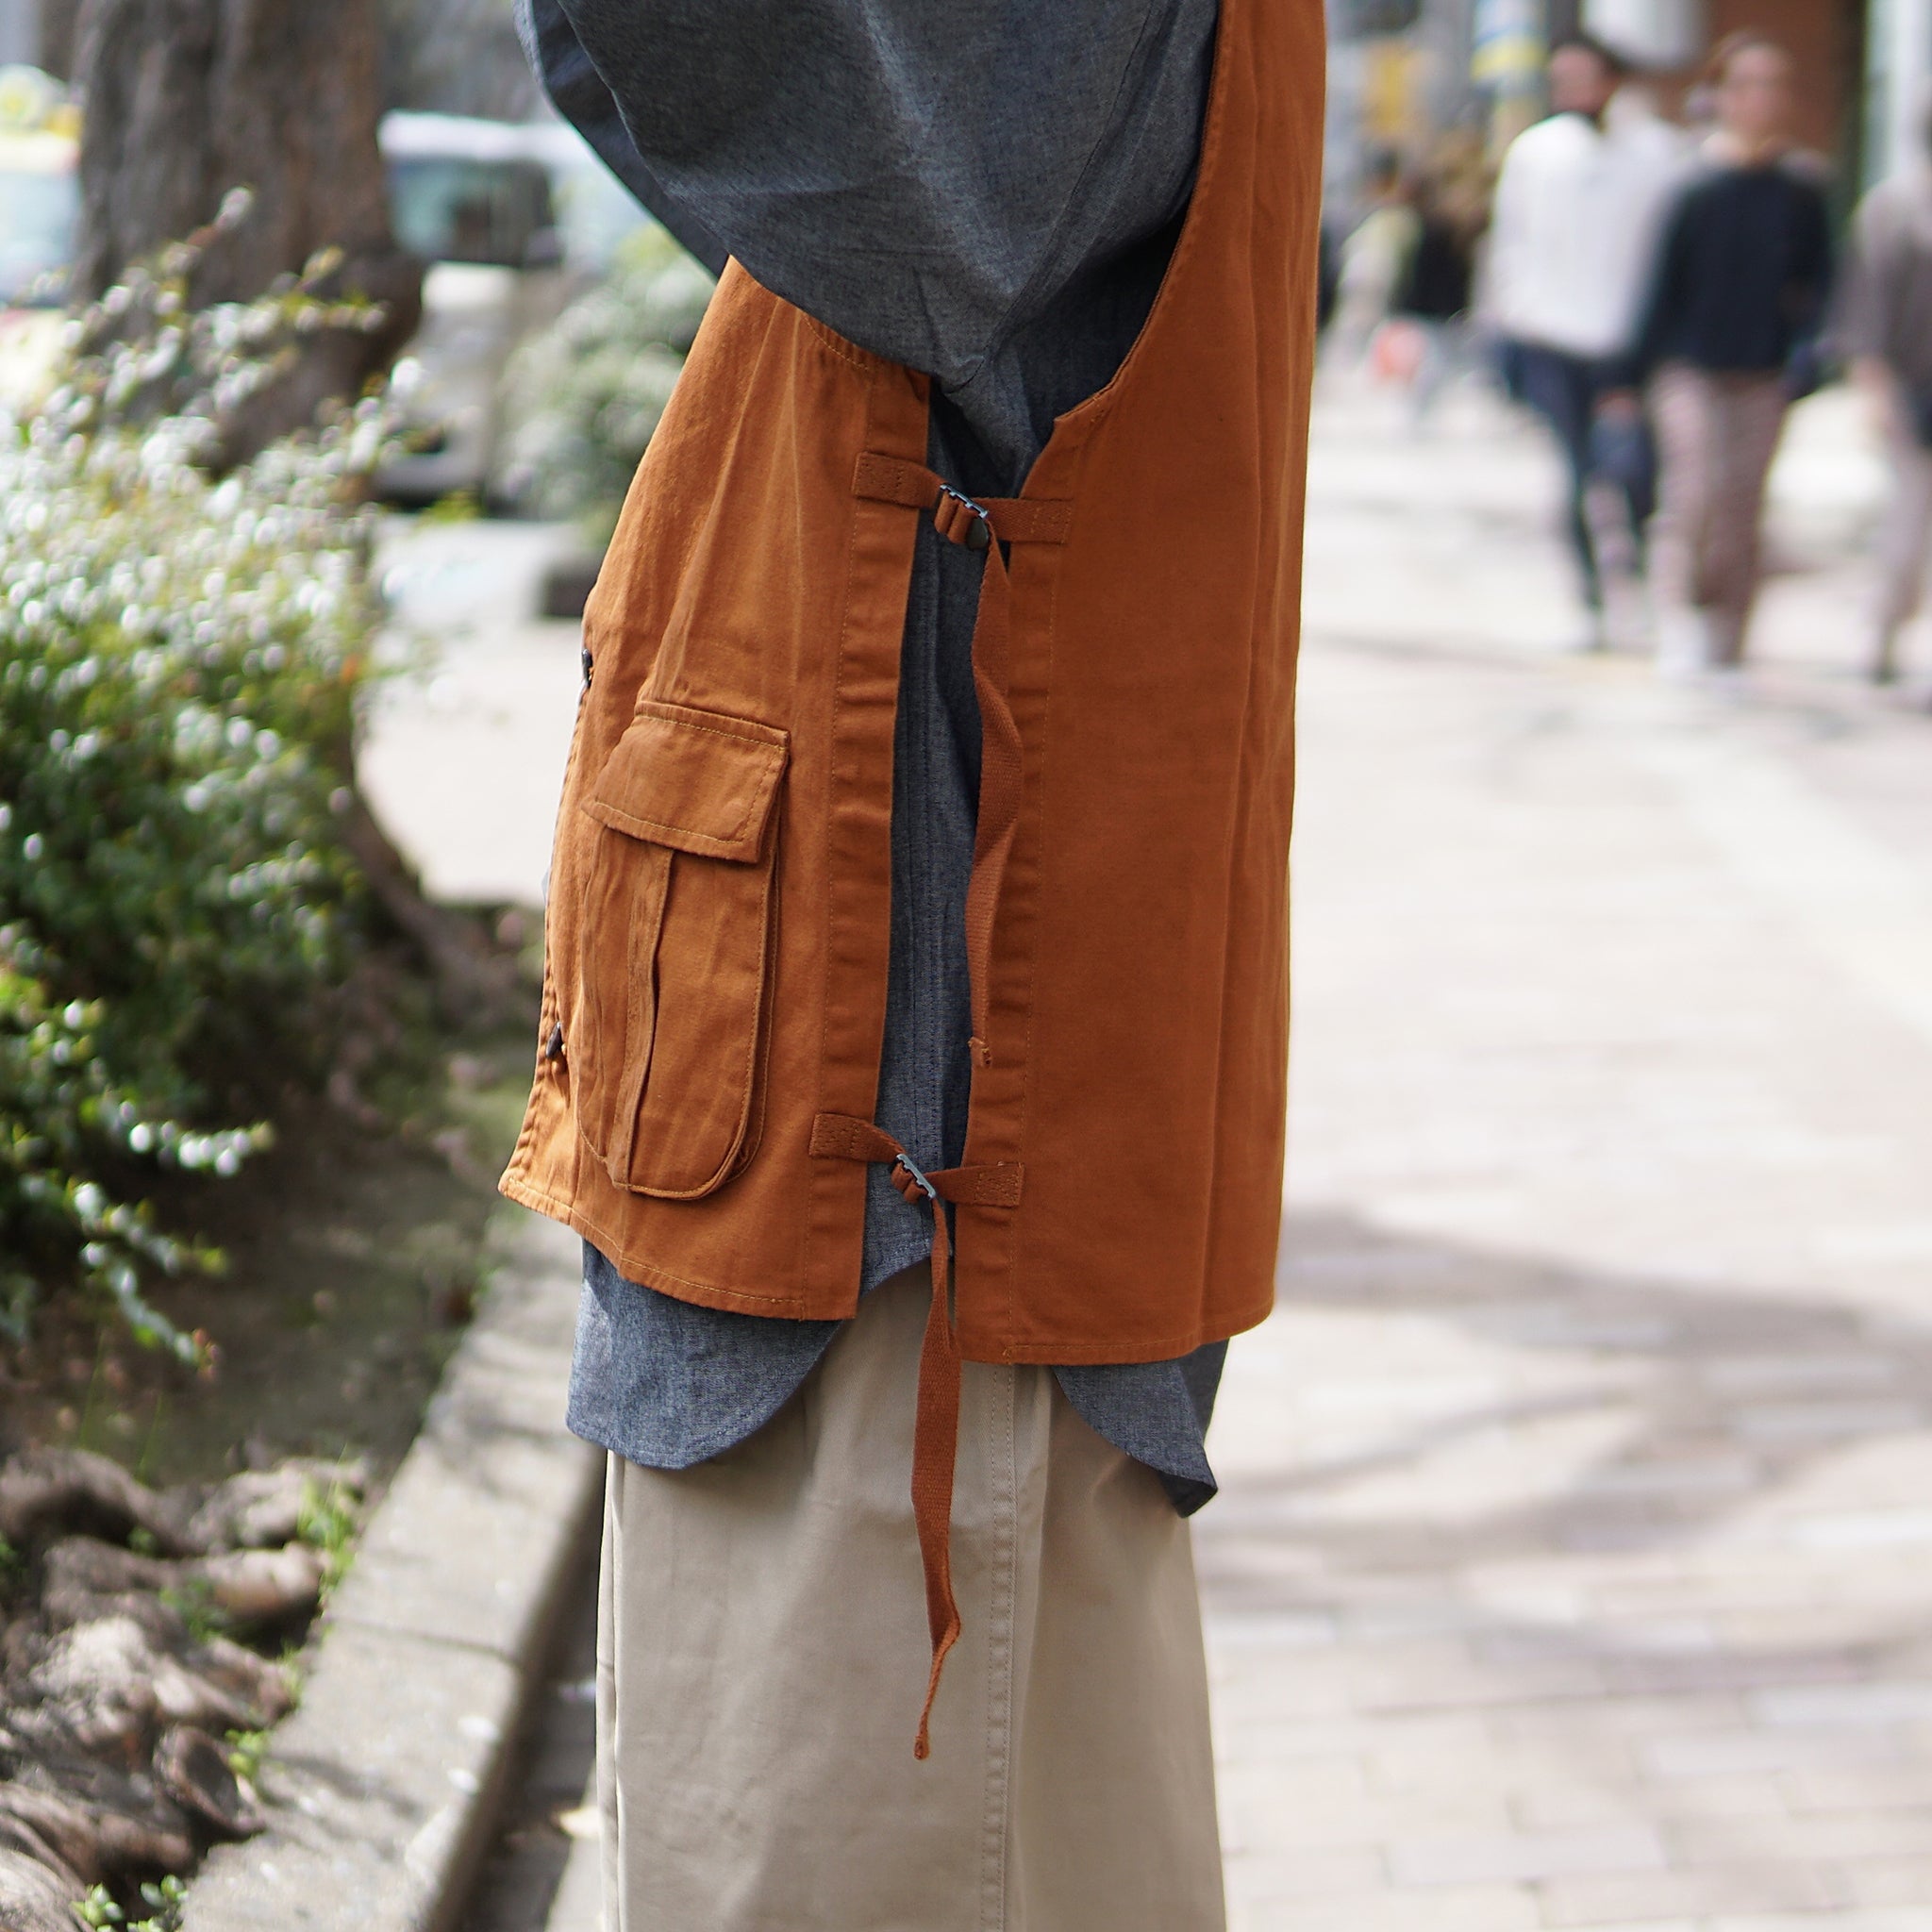 Name:SS23-SHOOTER VEST | Color:Brown | Size:L【WORKWARE】